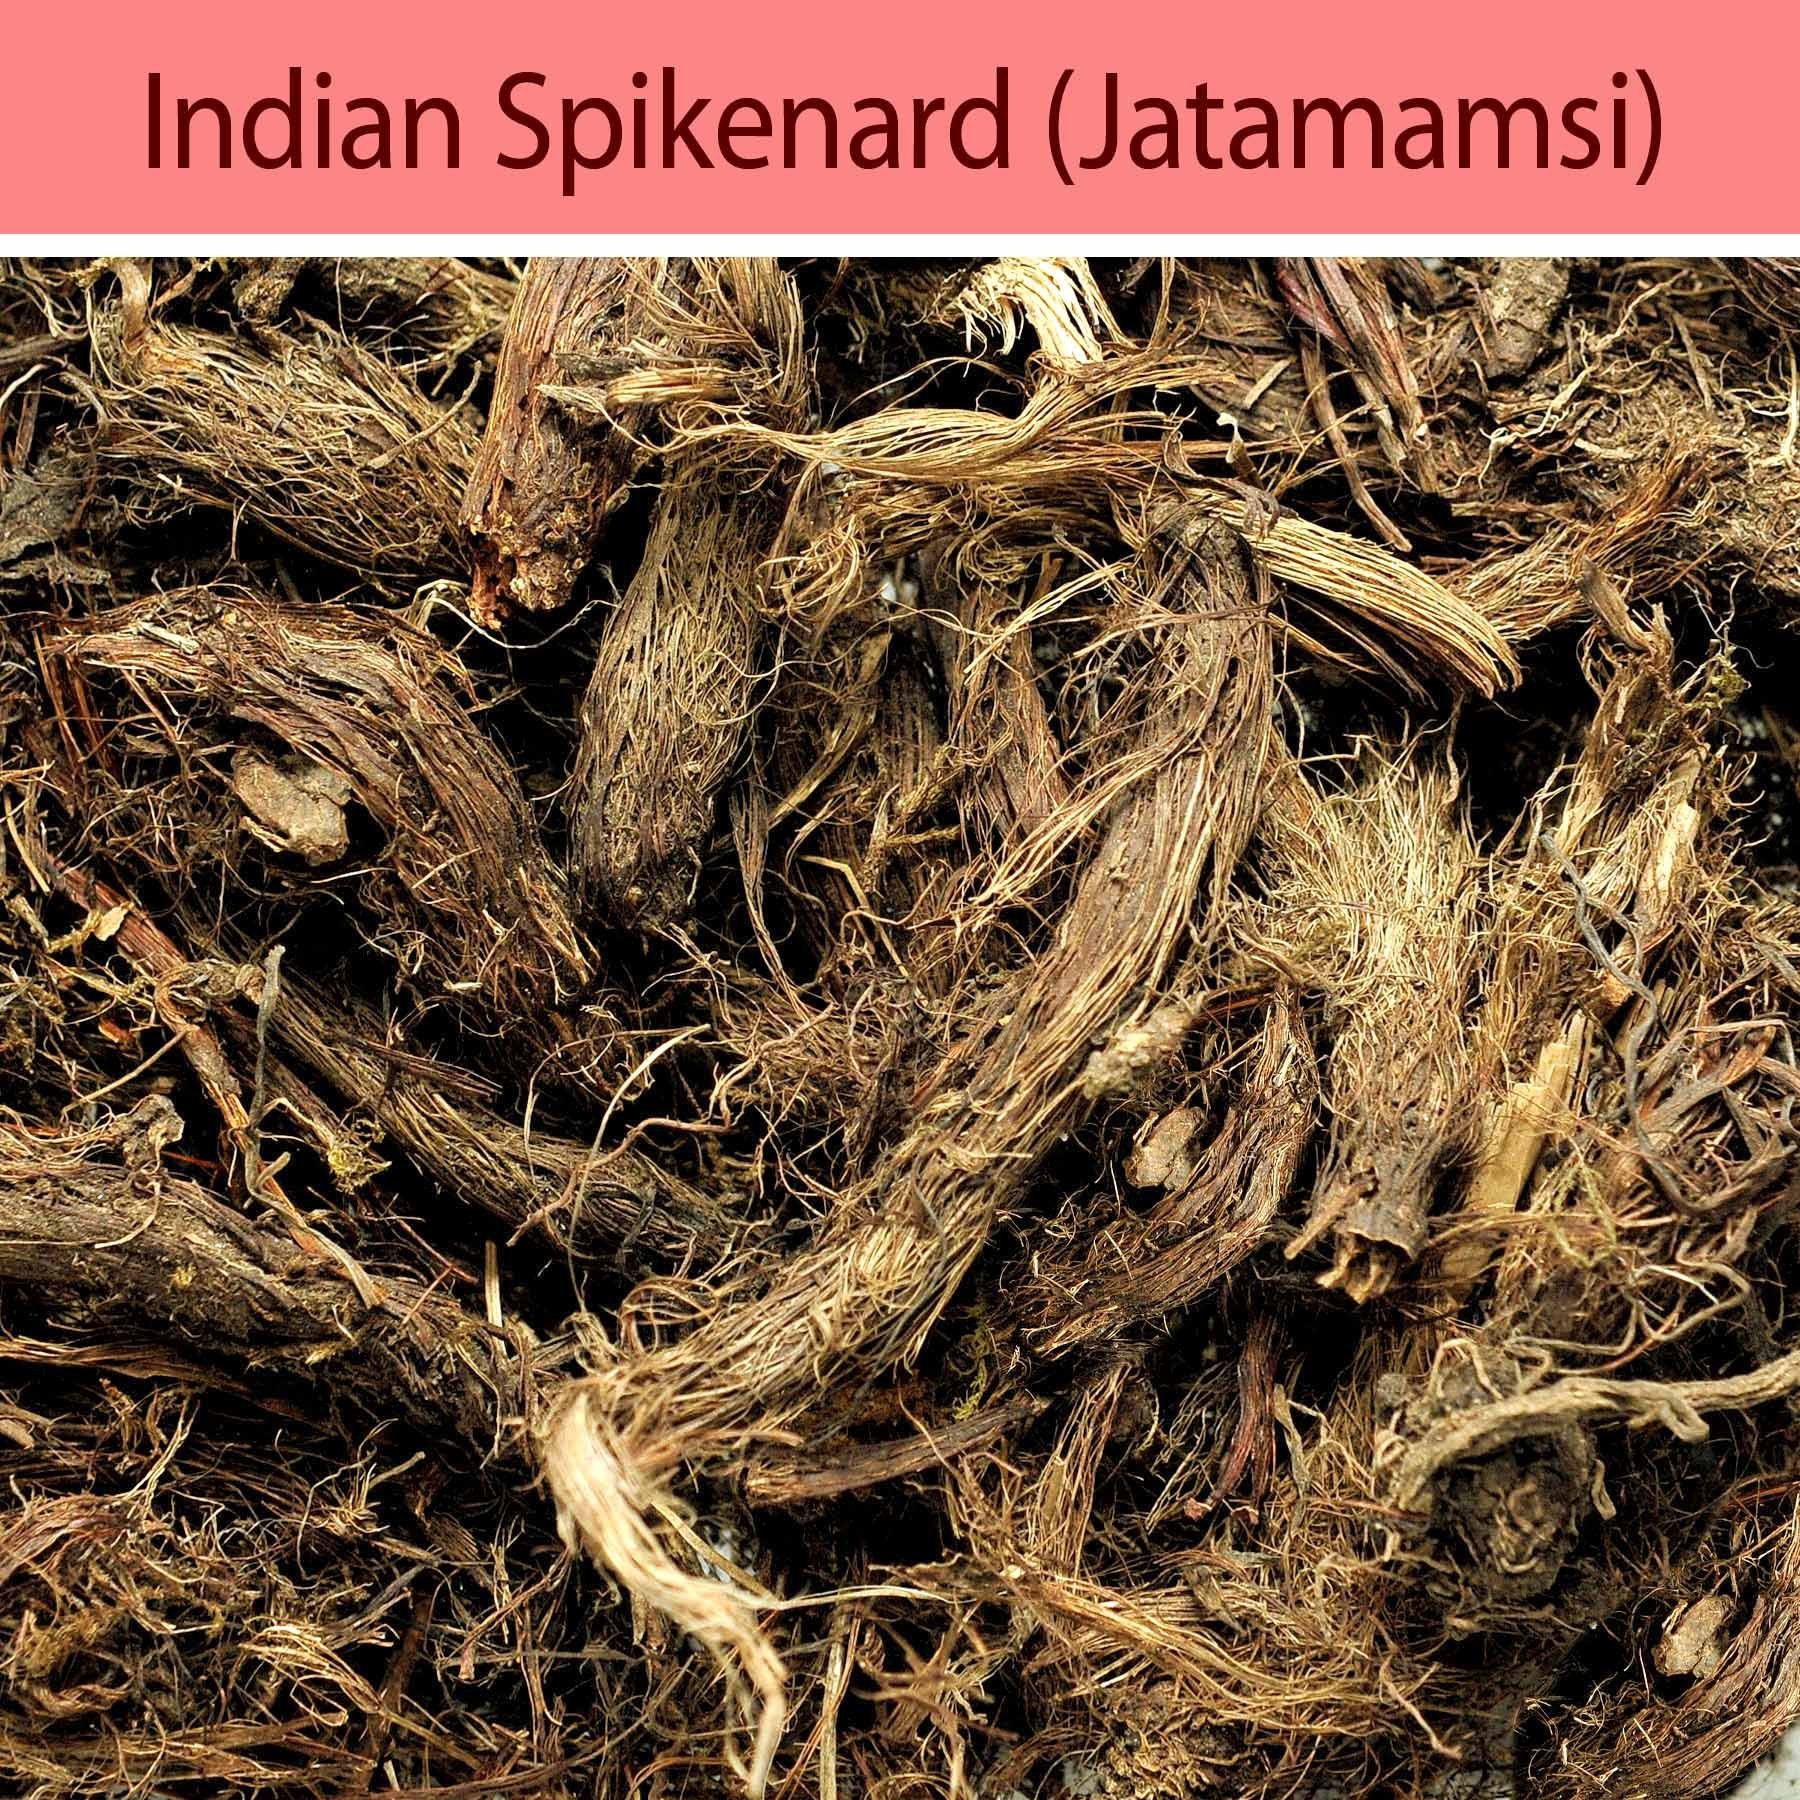 Indian Spikenard rhizome the root of the plant